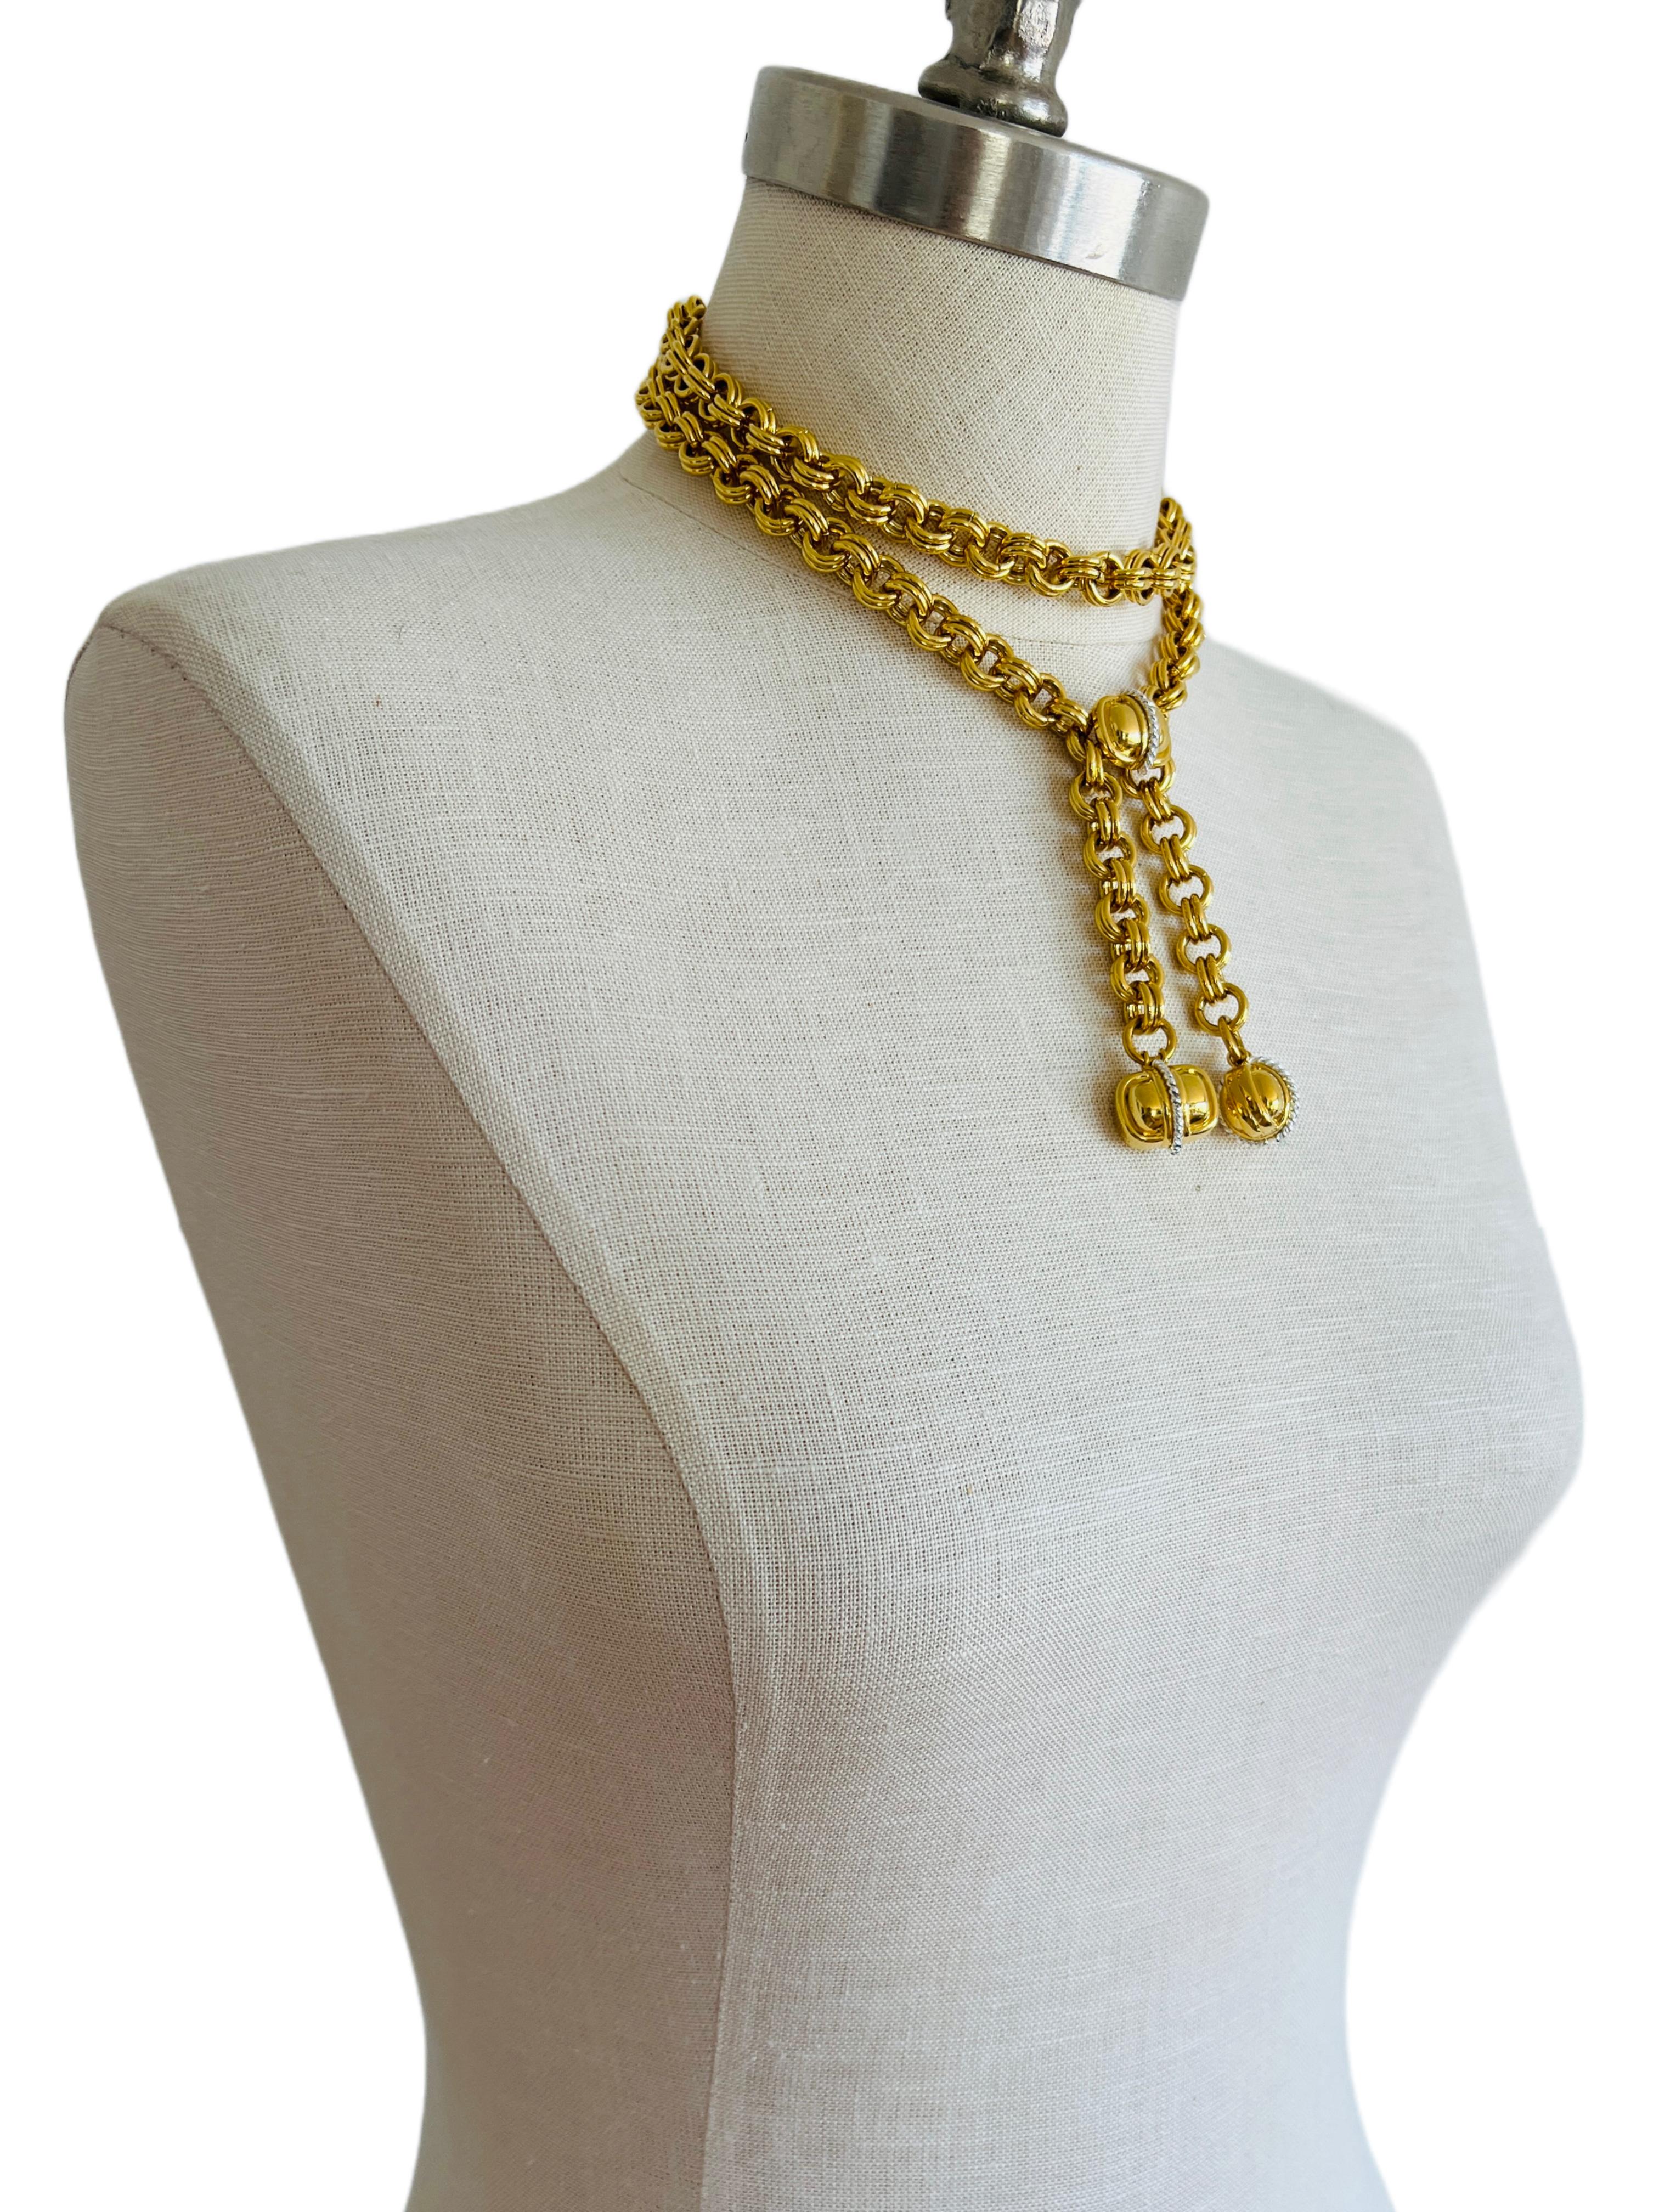 This vintage gold plated necklace is very versatile and quite heavy (195.9 grams). The center piece is a detachable clasp that can be reattached at any length. It can be worn doubled over as choker, long or in between. It can also be worn as a belt!